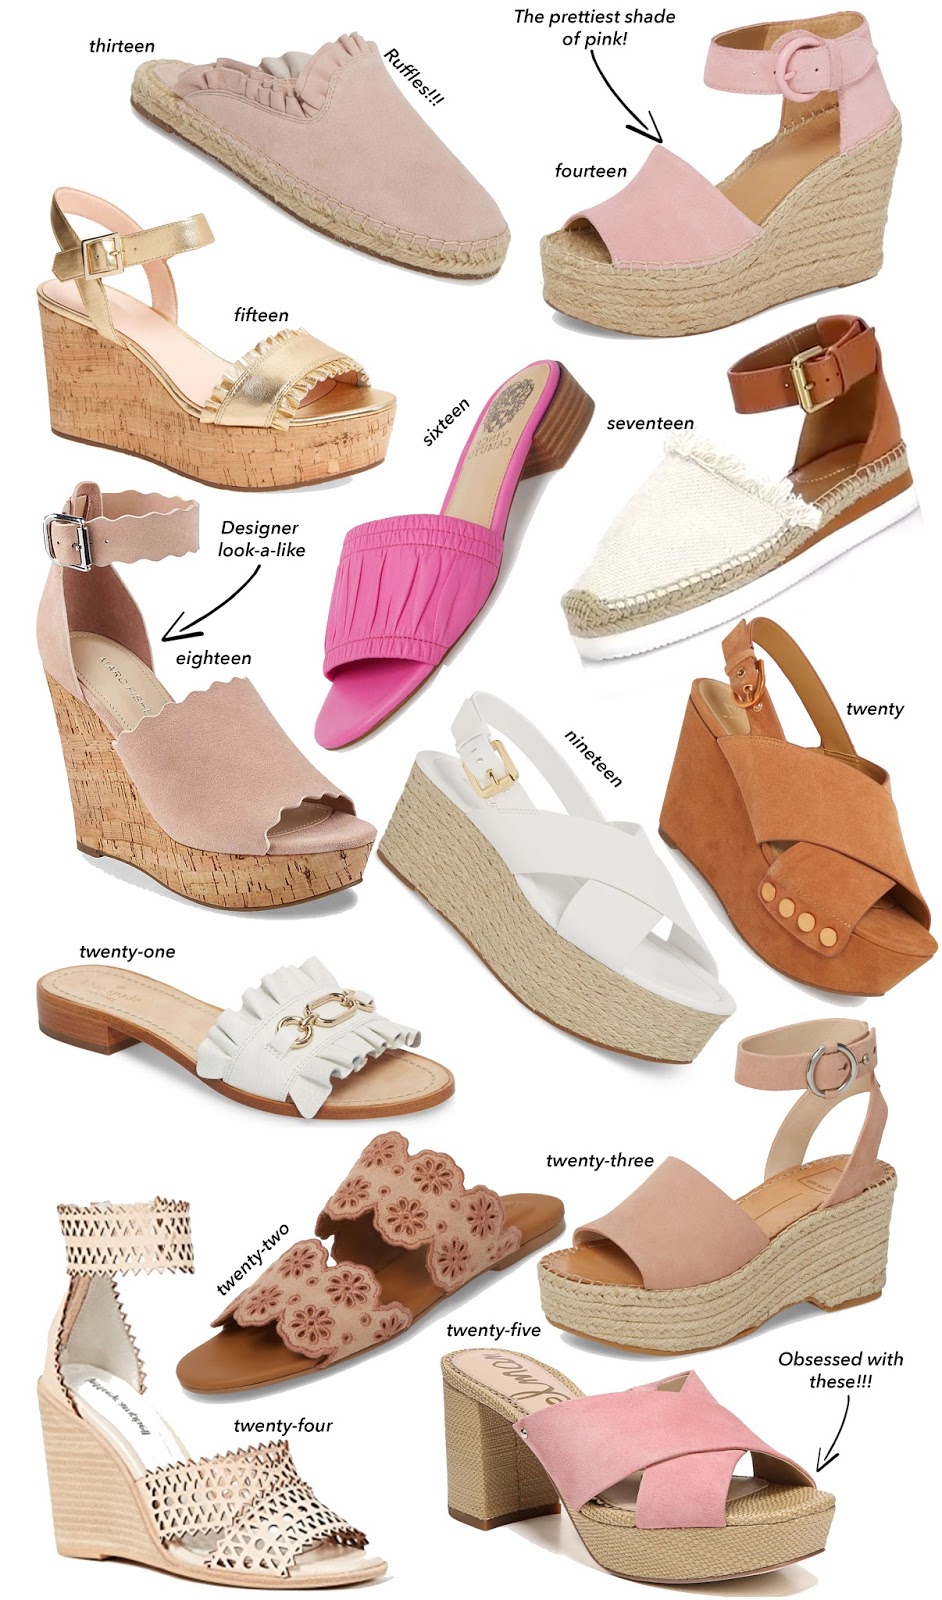 25 Shoes for Spring - Click through to Something Delightful Blog for details